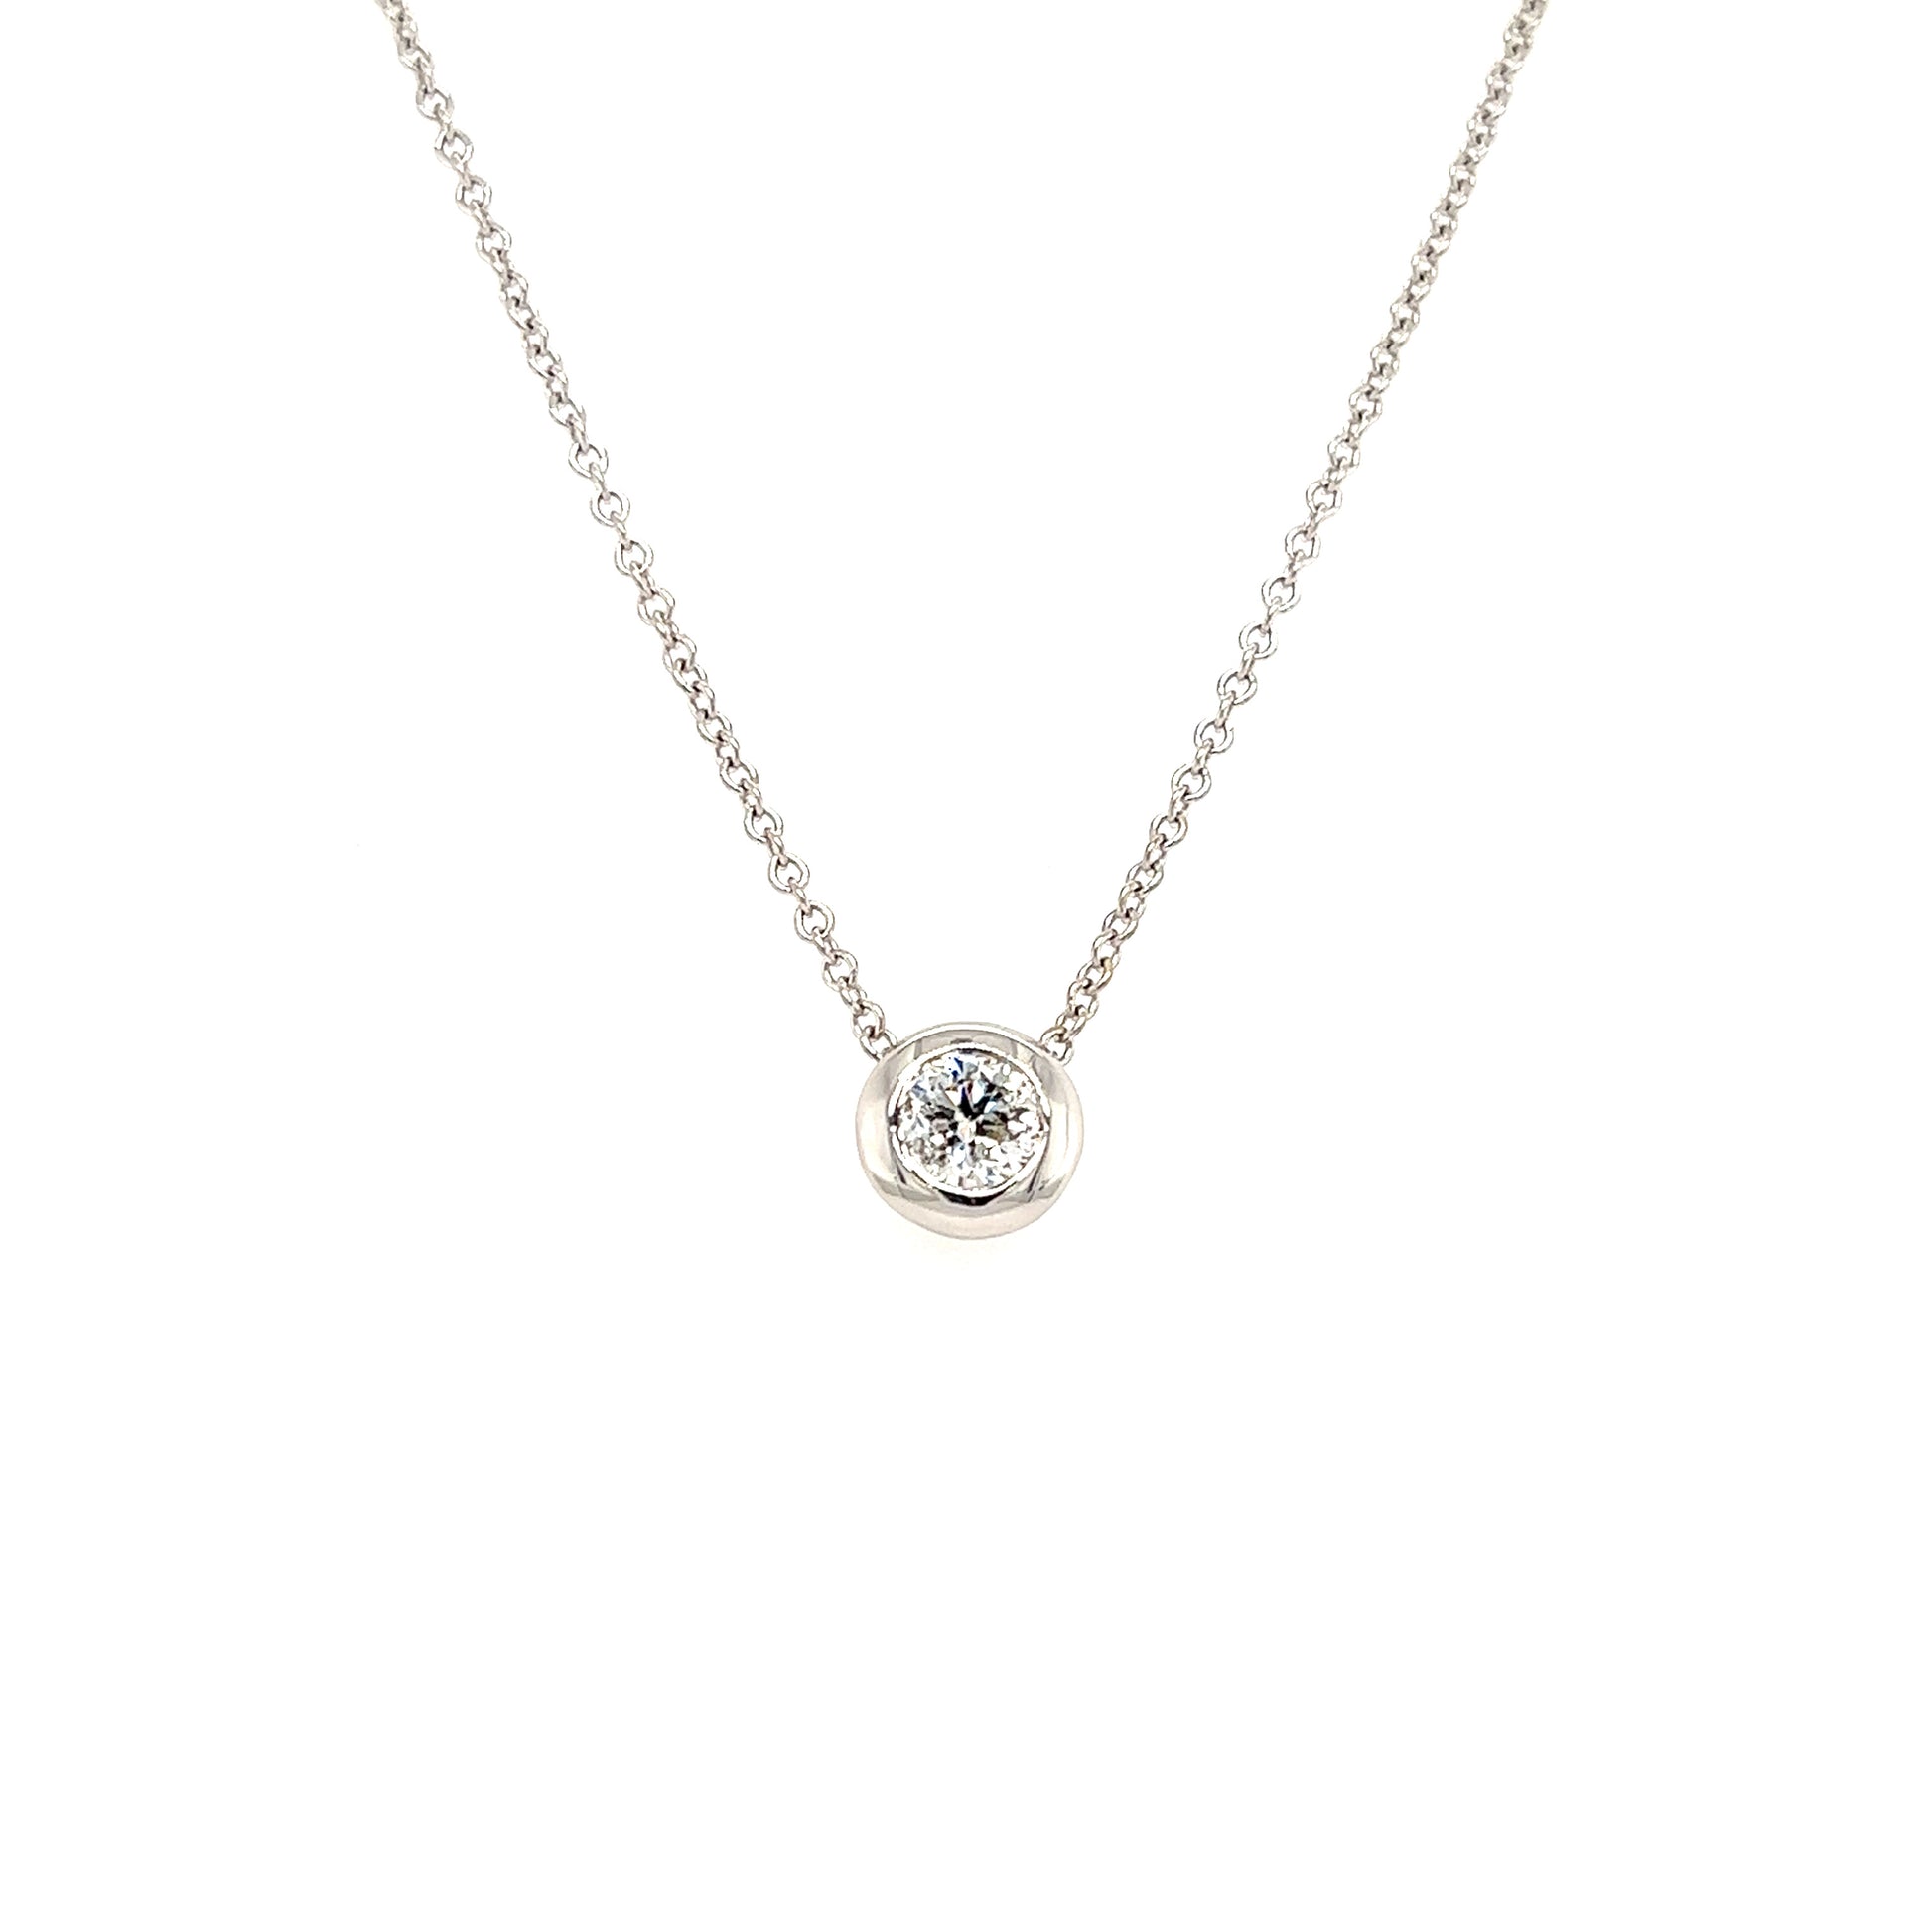 Bezel Diamond Necklace with 0.6ct of Diamonds in 14K White Gold Zoom In View